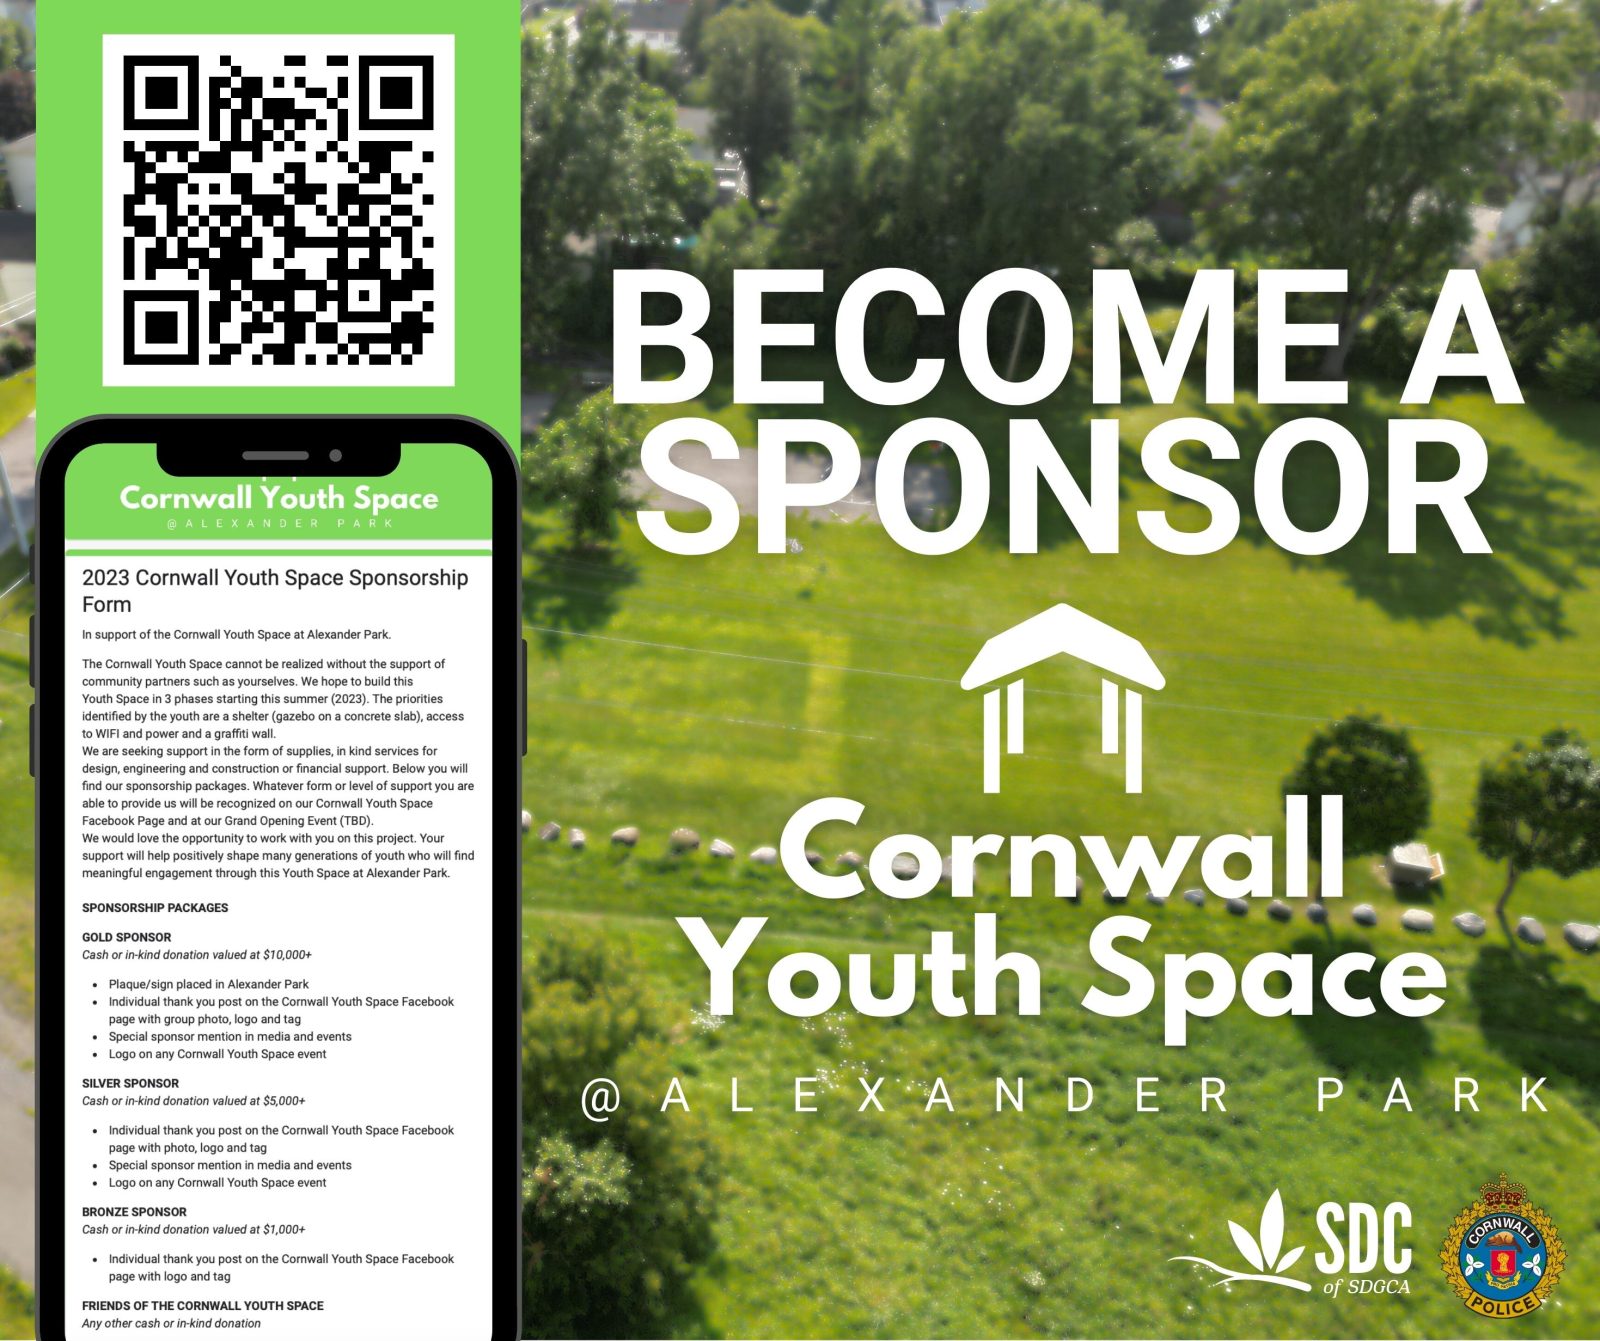 In support of Cornwall’s Youth Space at Alexander Park